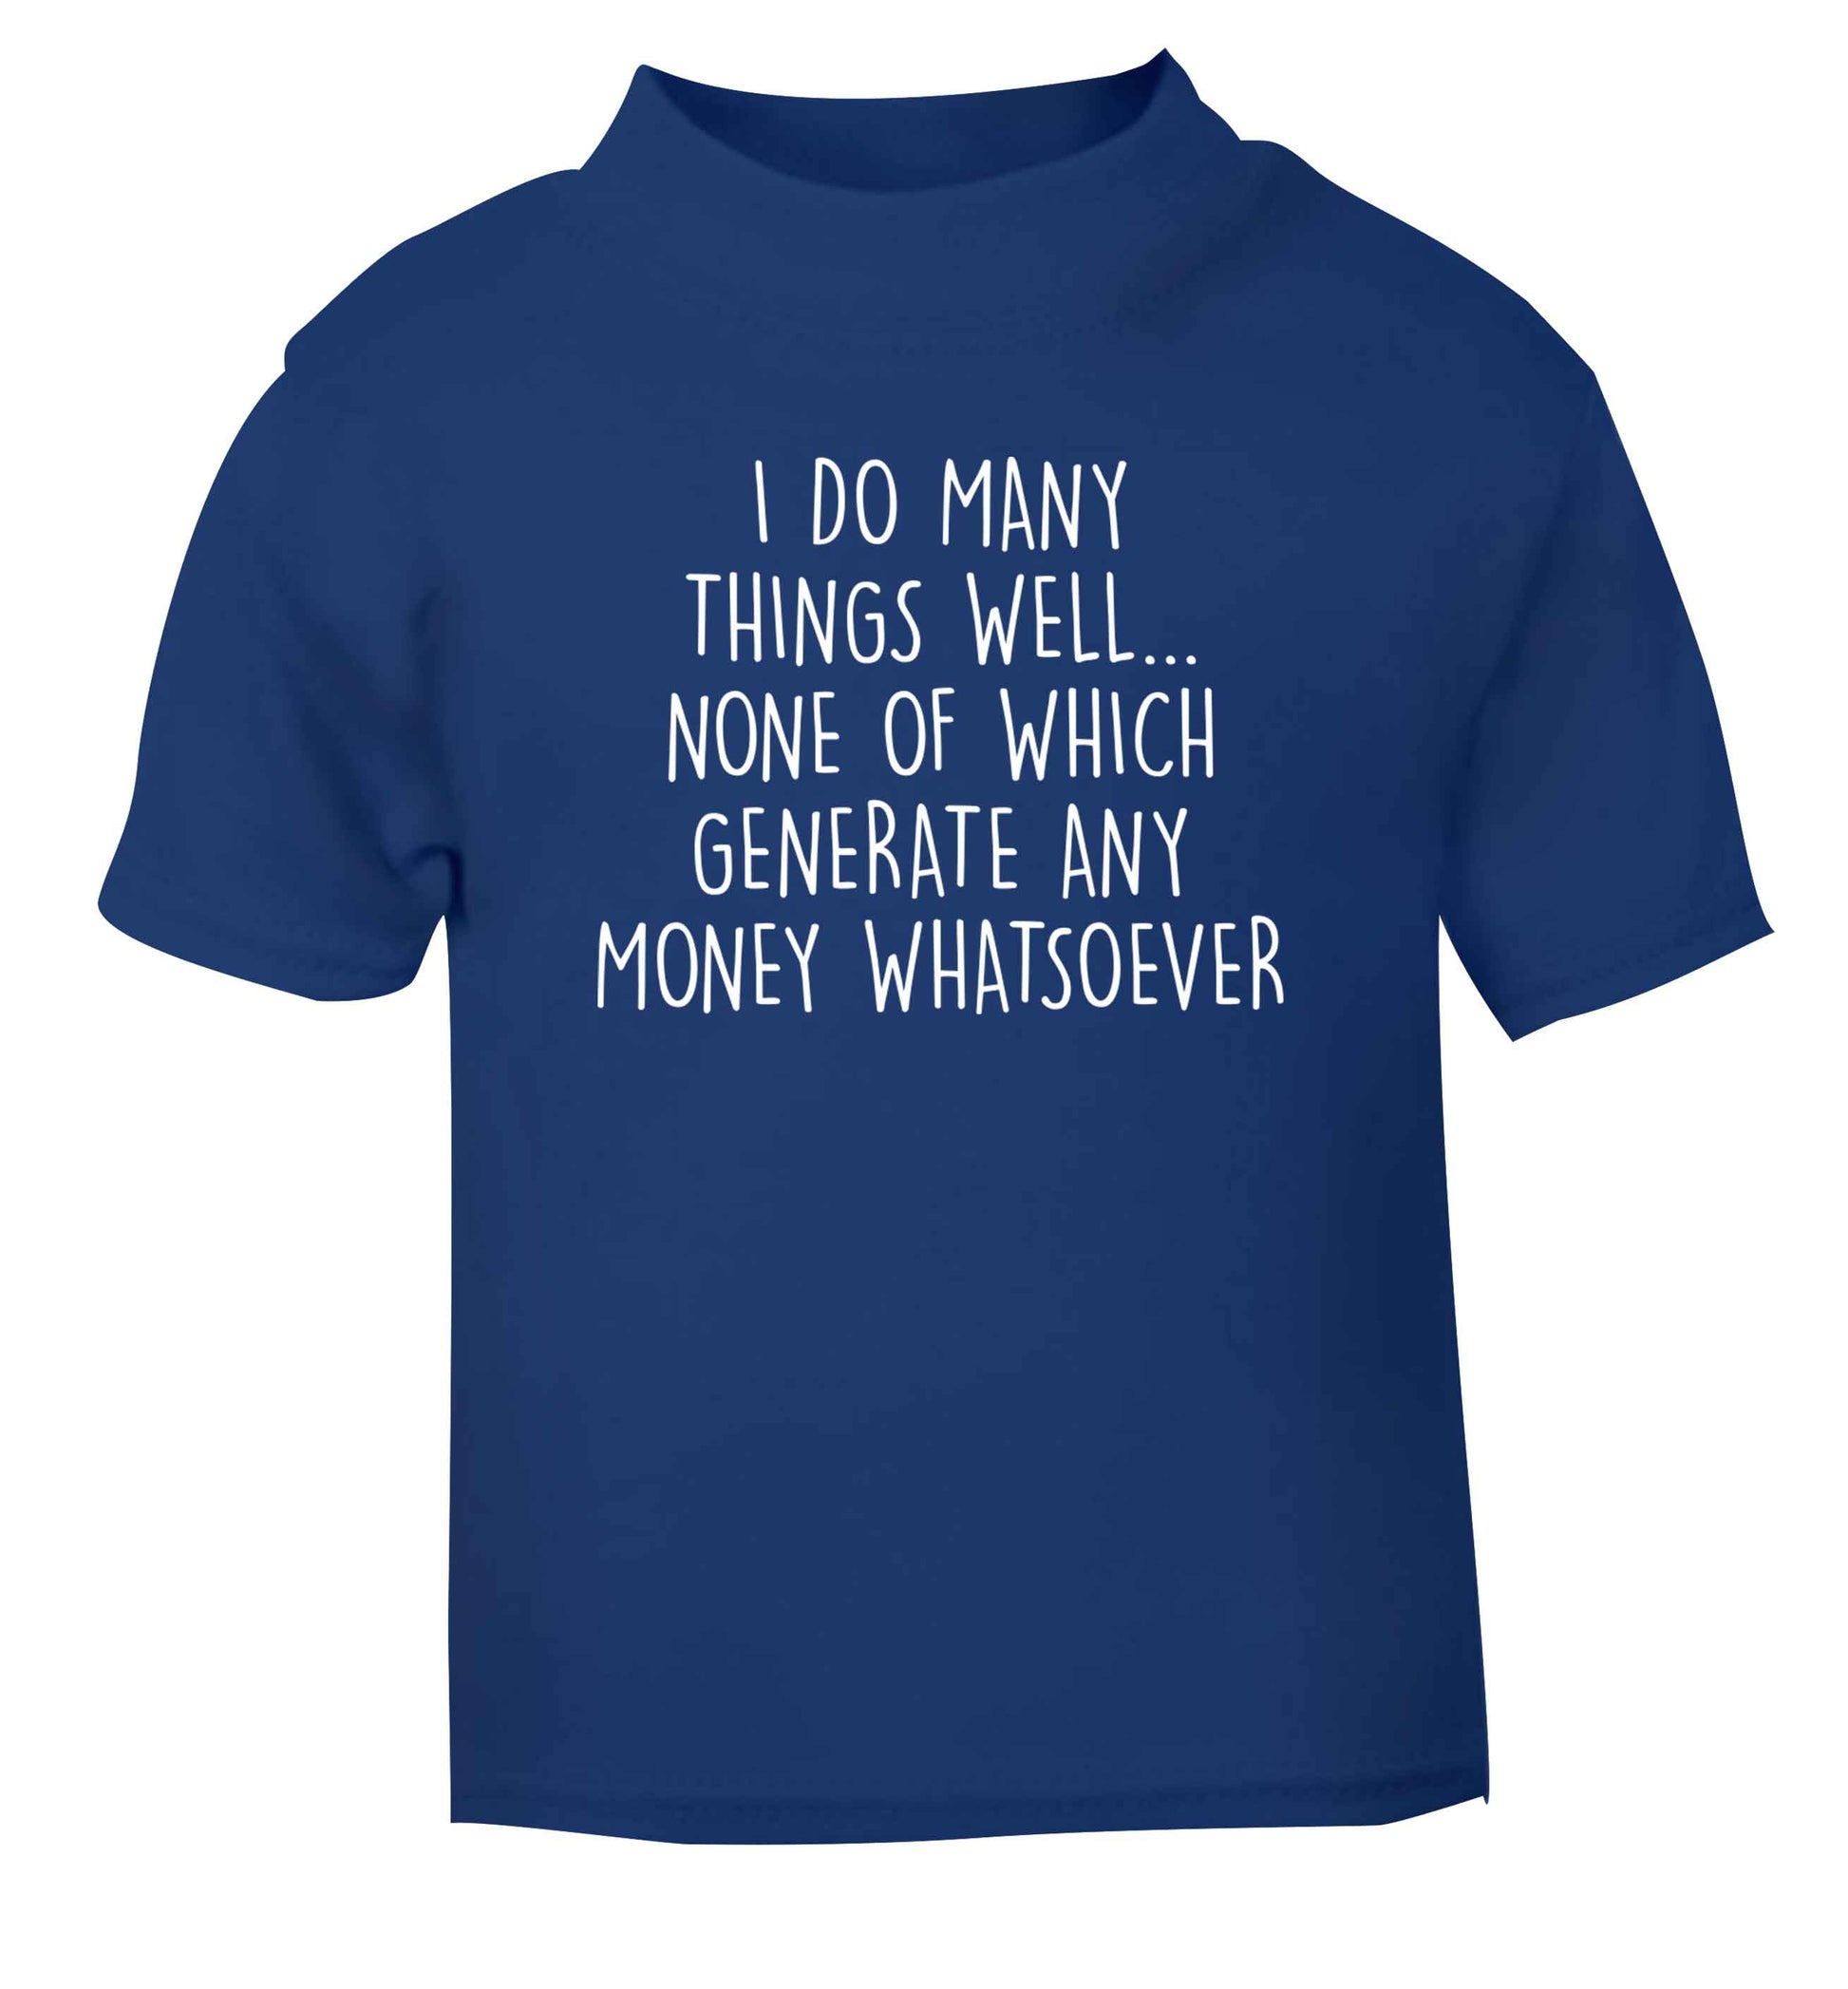 I do many things well none of which generate income blue Baby Toddler Tshirt 2 Years